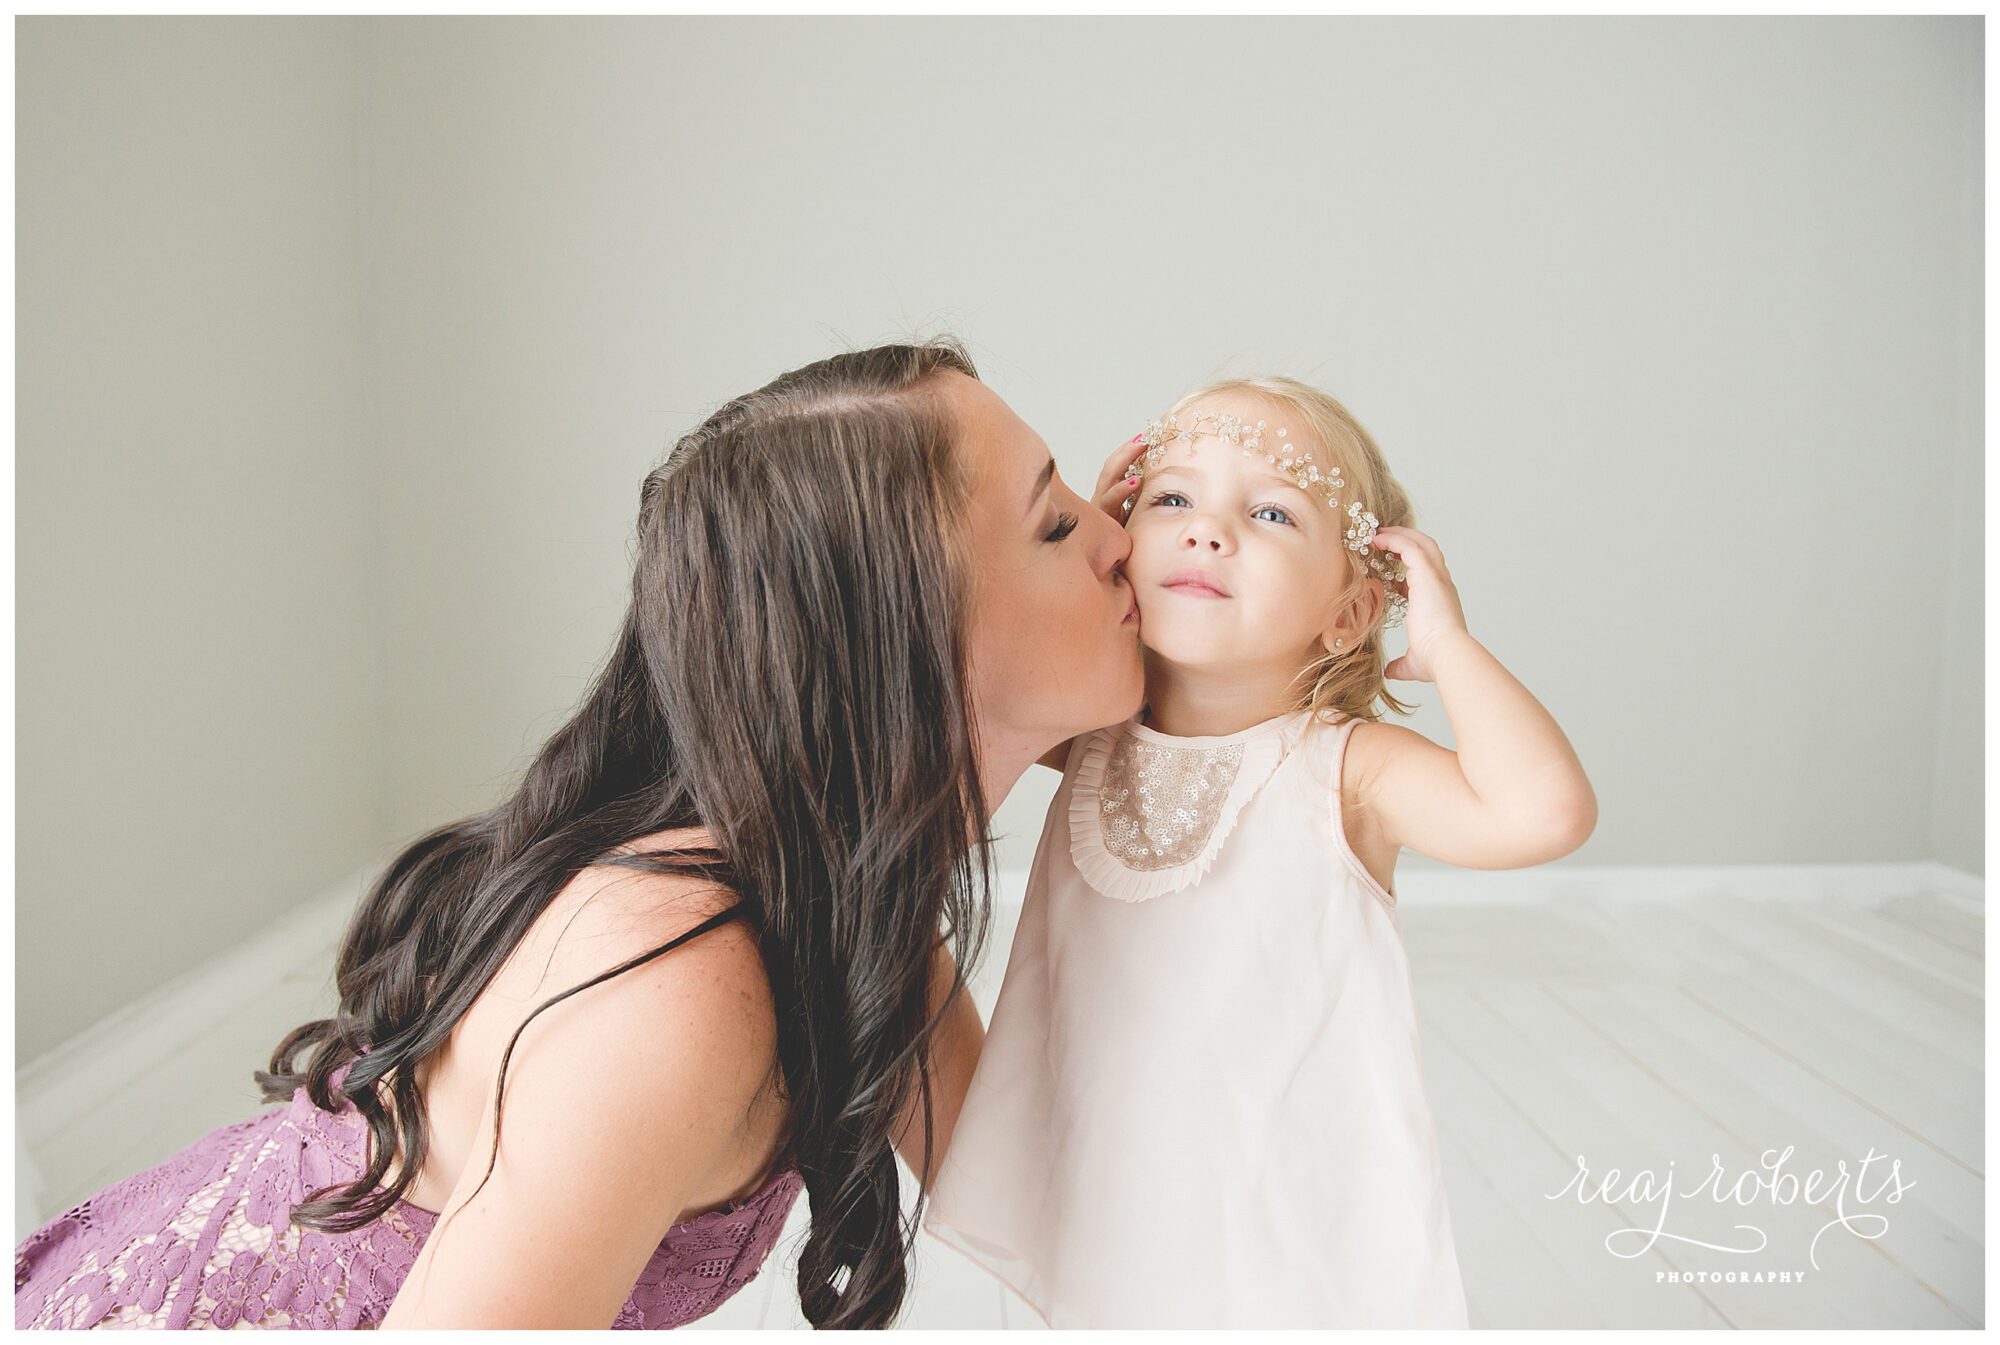 Mommy and Me Chandler Baby Photographer | Reaj Roberts Photography